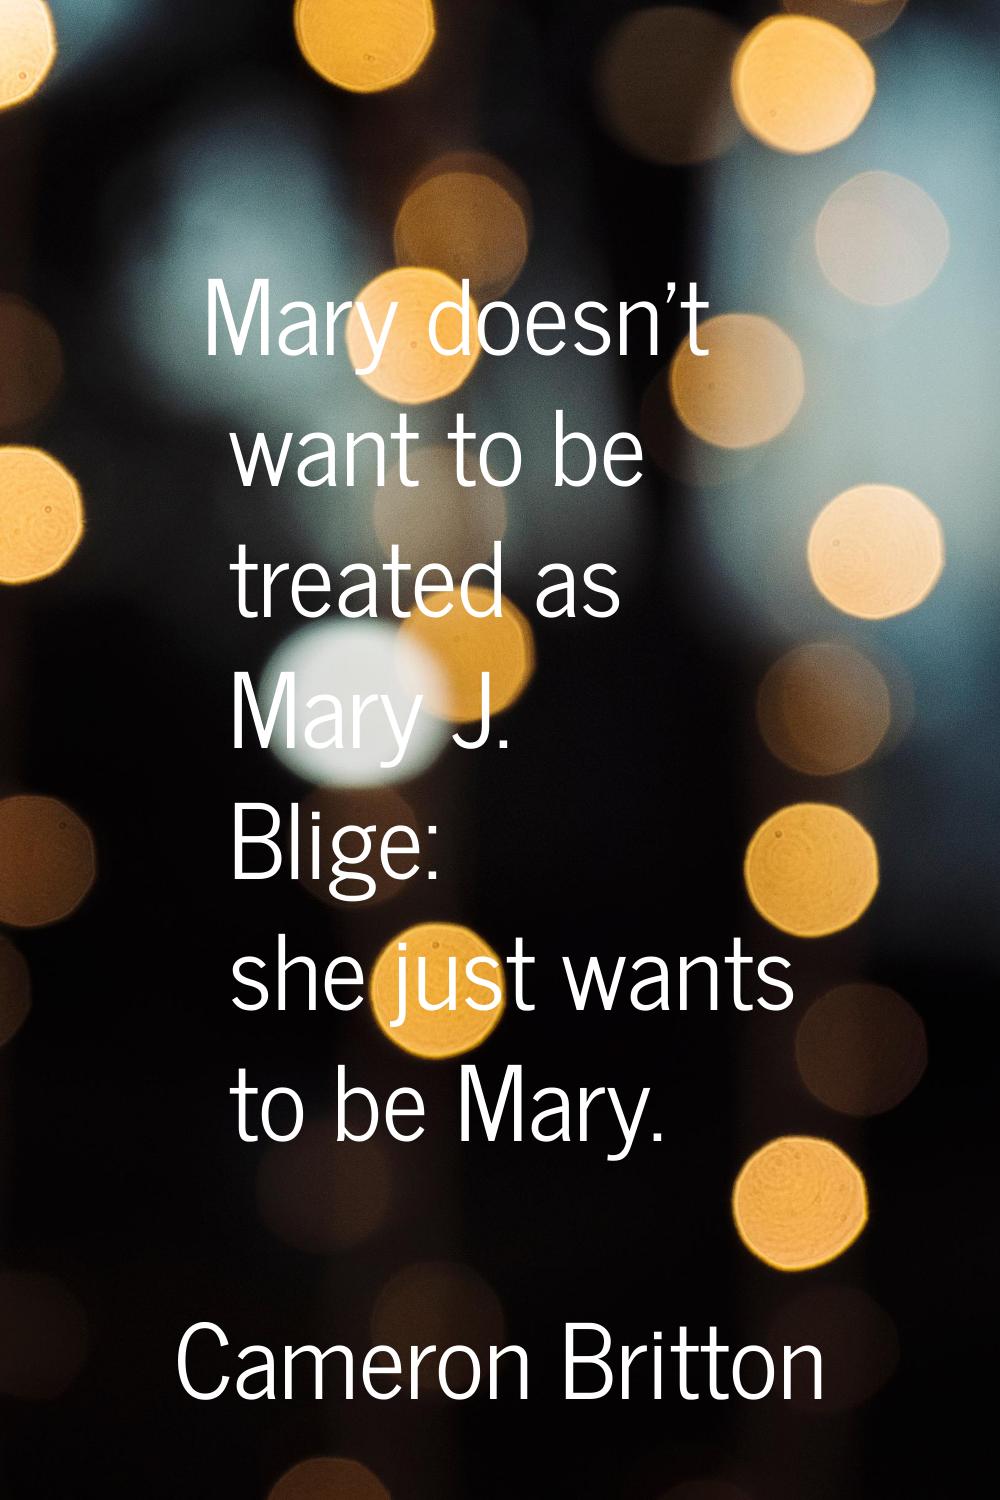 Mary doesn't want to be treated as Mary J. Blige: she just wants to be Mary.